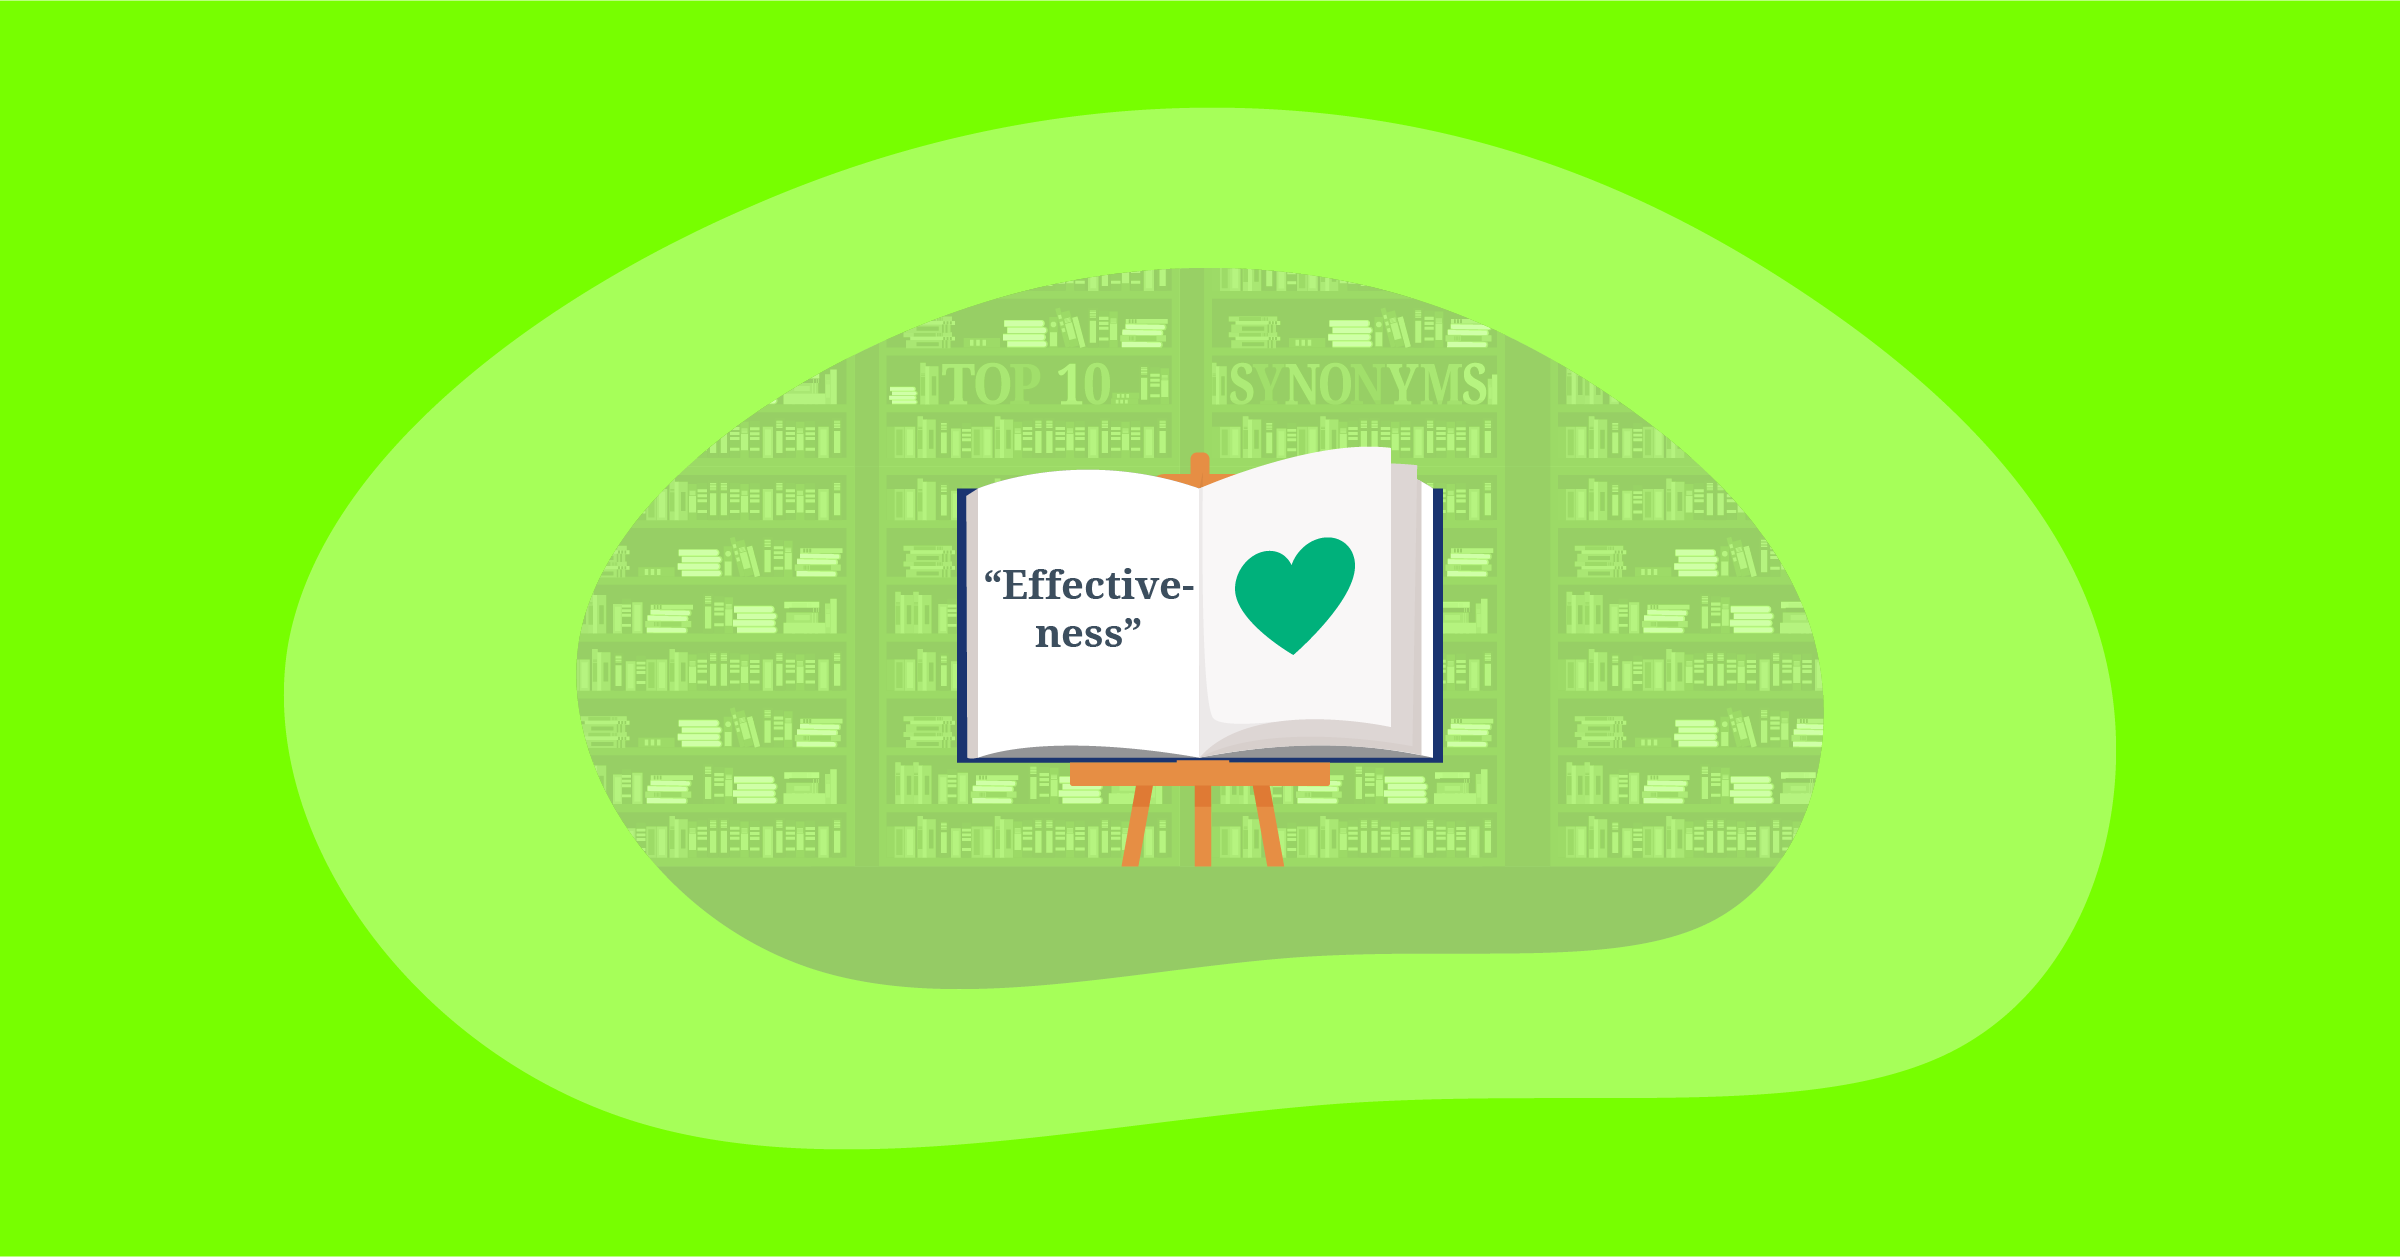 Illustration for top 10 positive impactful words for "Effectiveness"